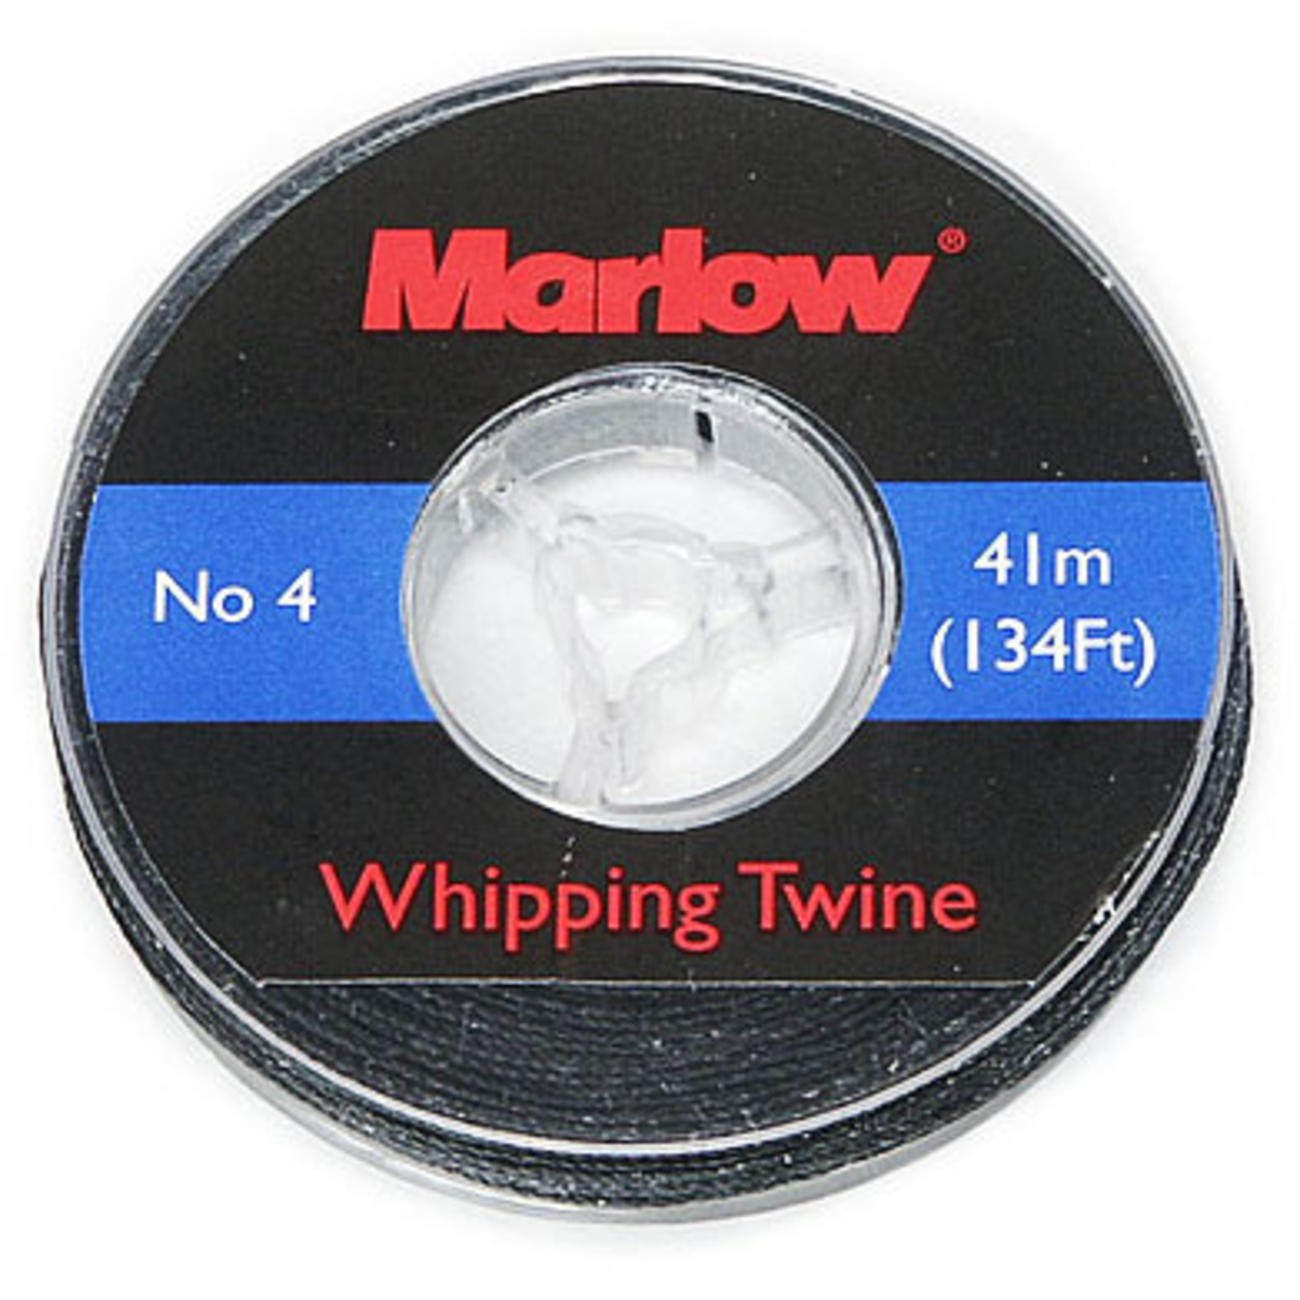 Whipping Twine No.4カラー / 1ケース 12個入り